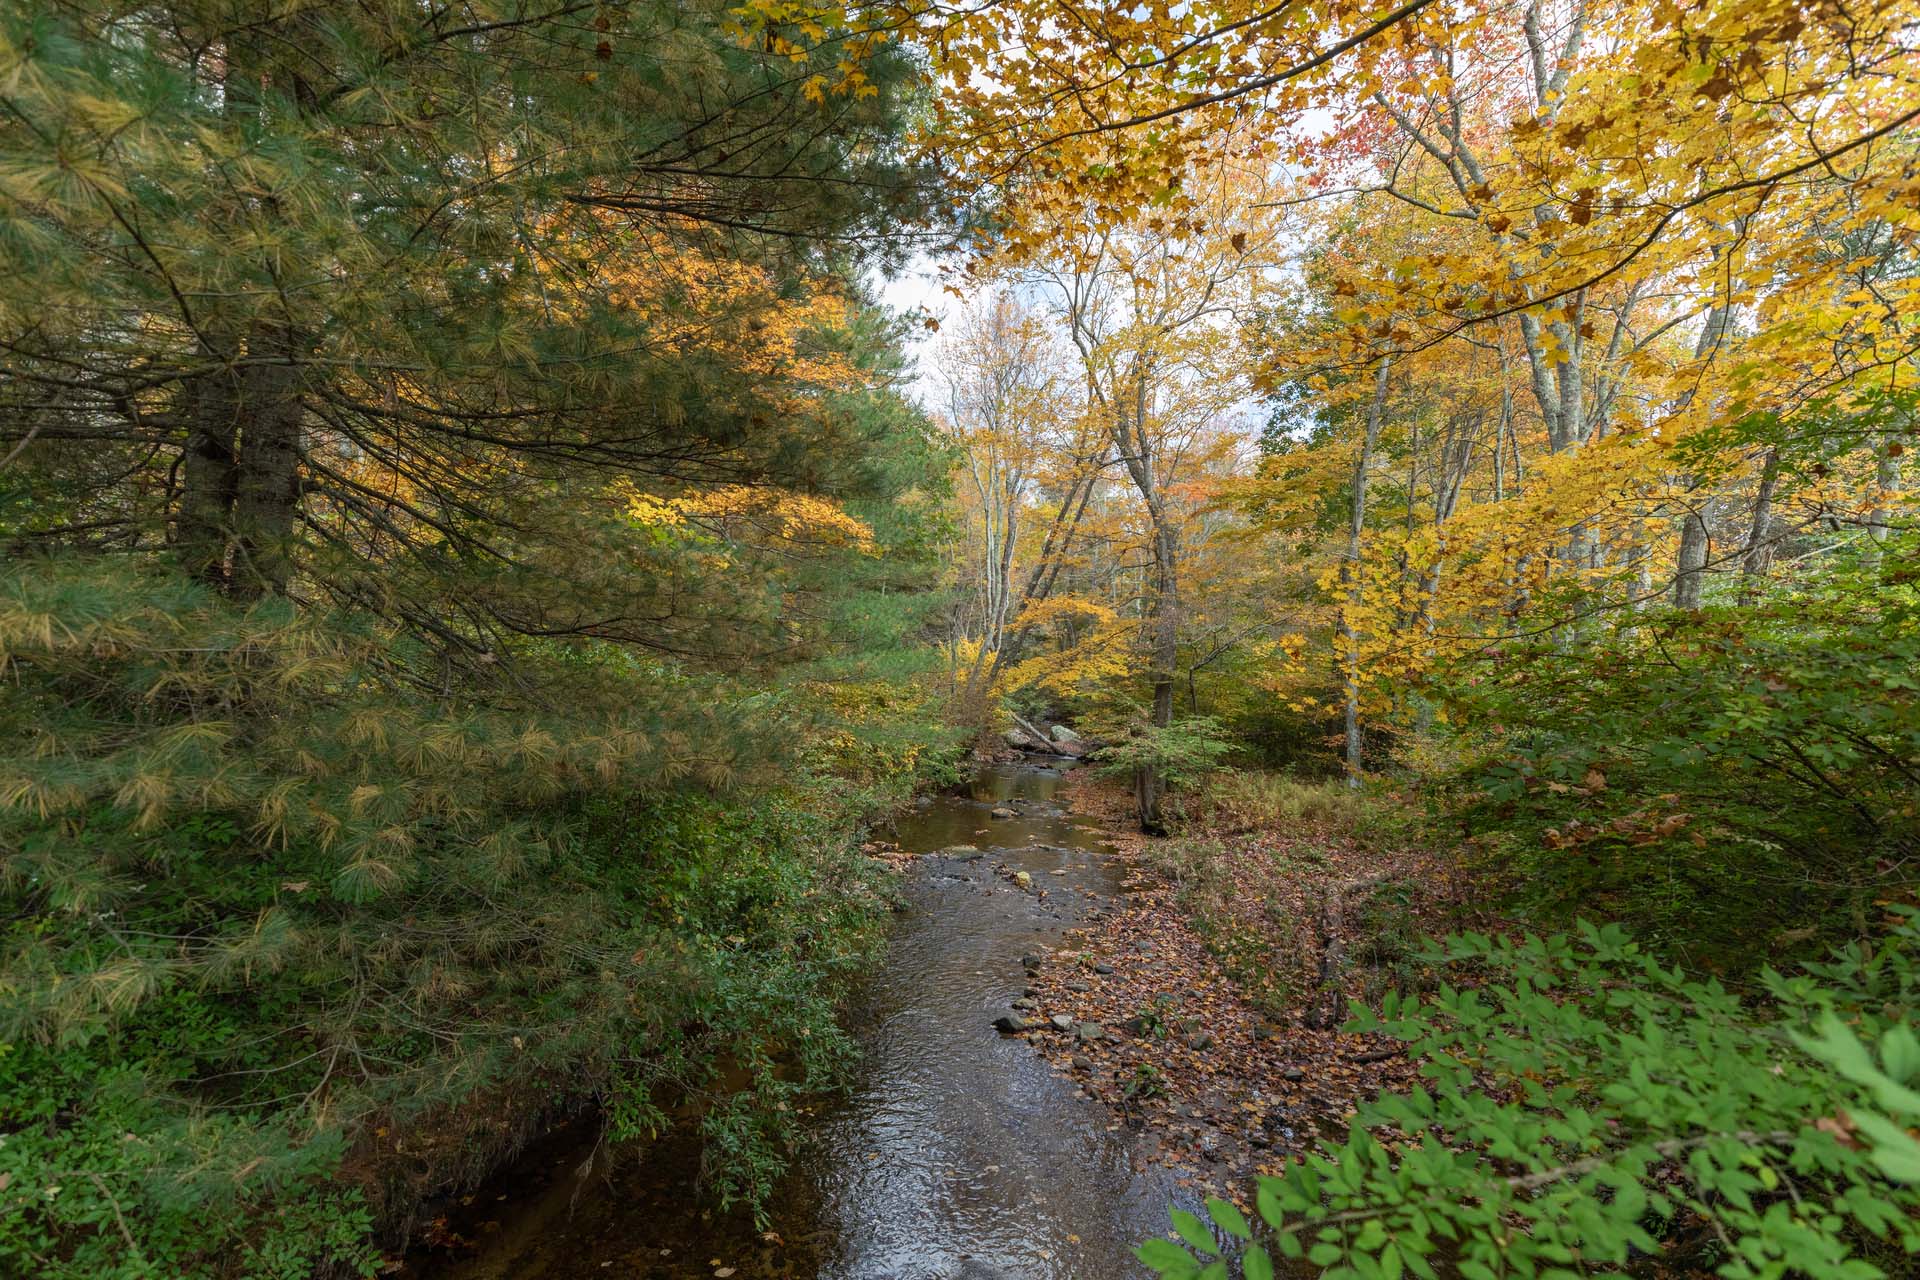 A green pine tree, yellow leaves, and a stream.